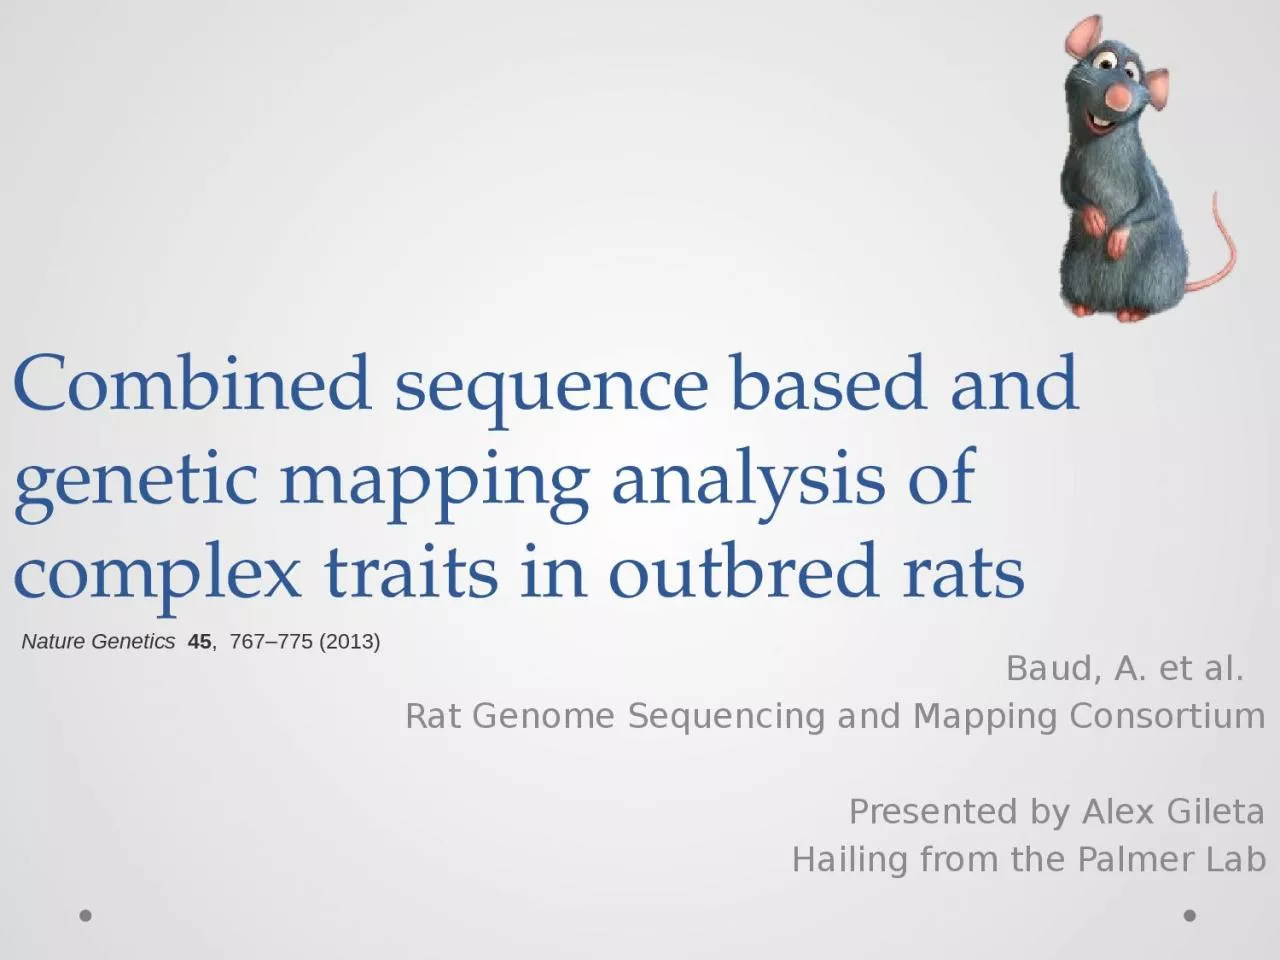 Combined sequence based and genetic mapping analysis of complex traits in outbred rats